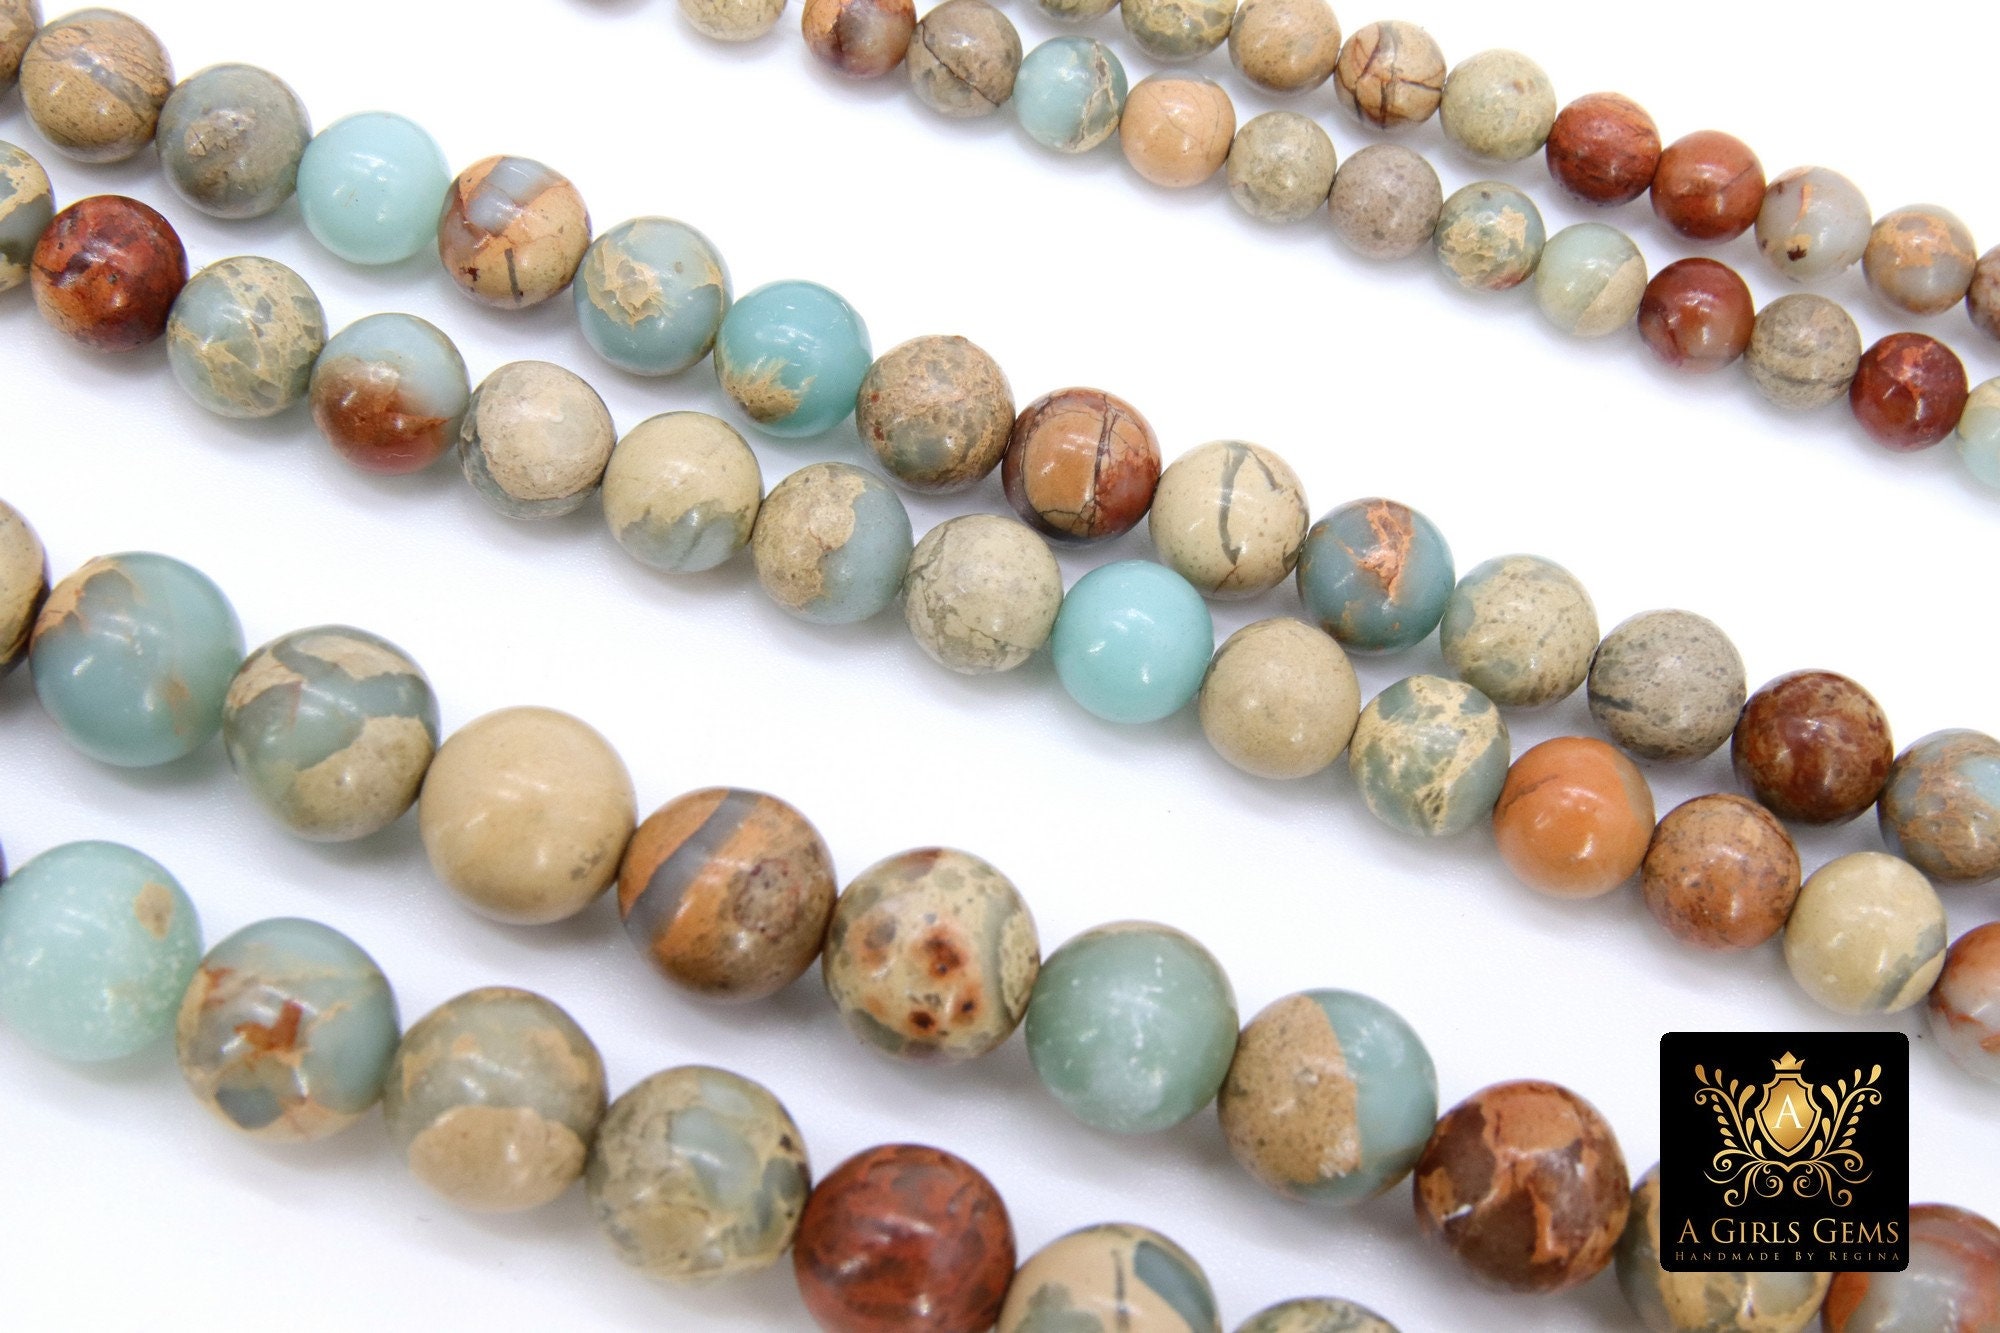 Natural African Blue Turquoise Opal Beads, Beige and Cream Round